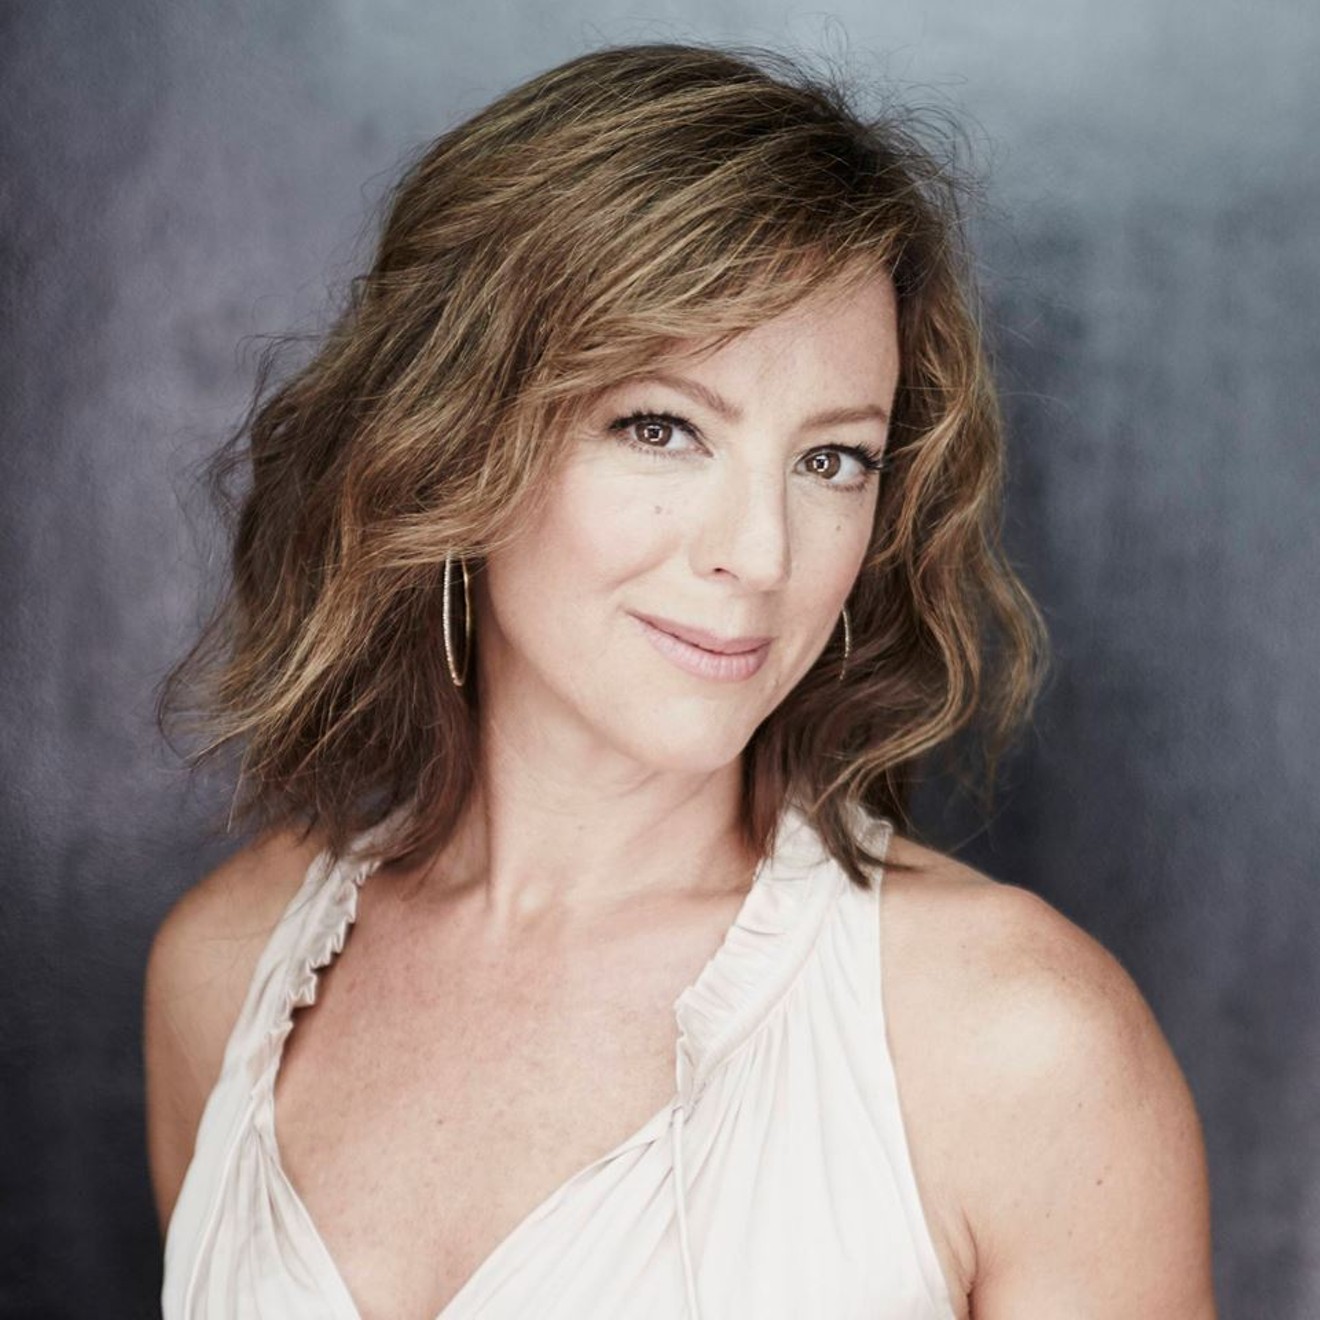 Sarah McLachlan will team up with the Colorado Symphony for a Red Rocks show.